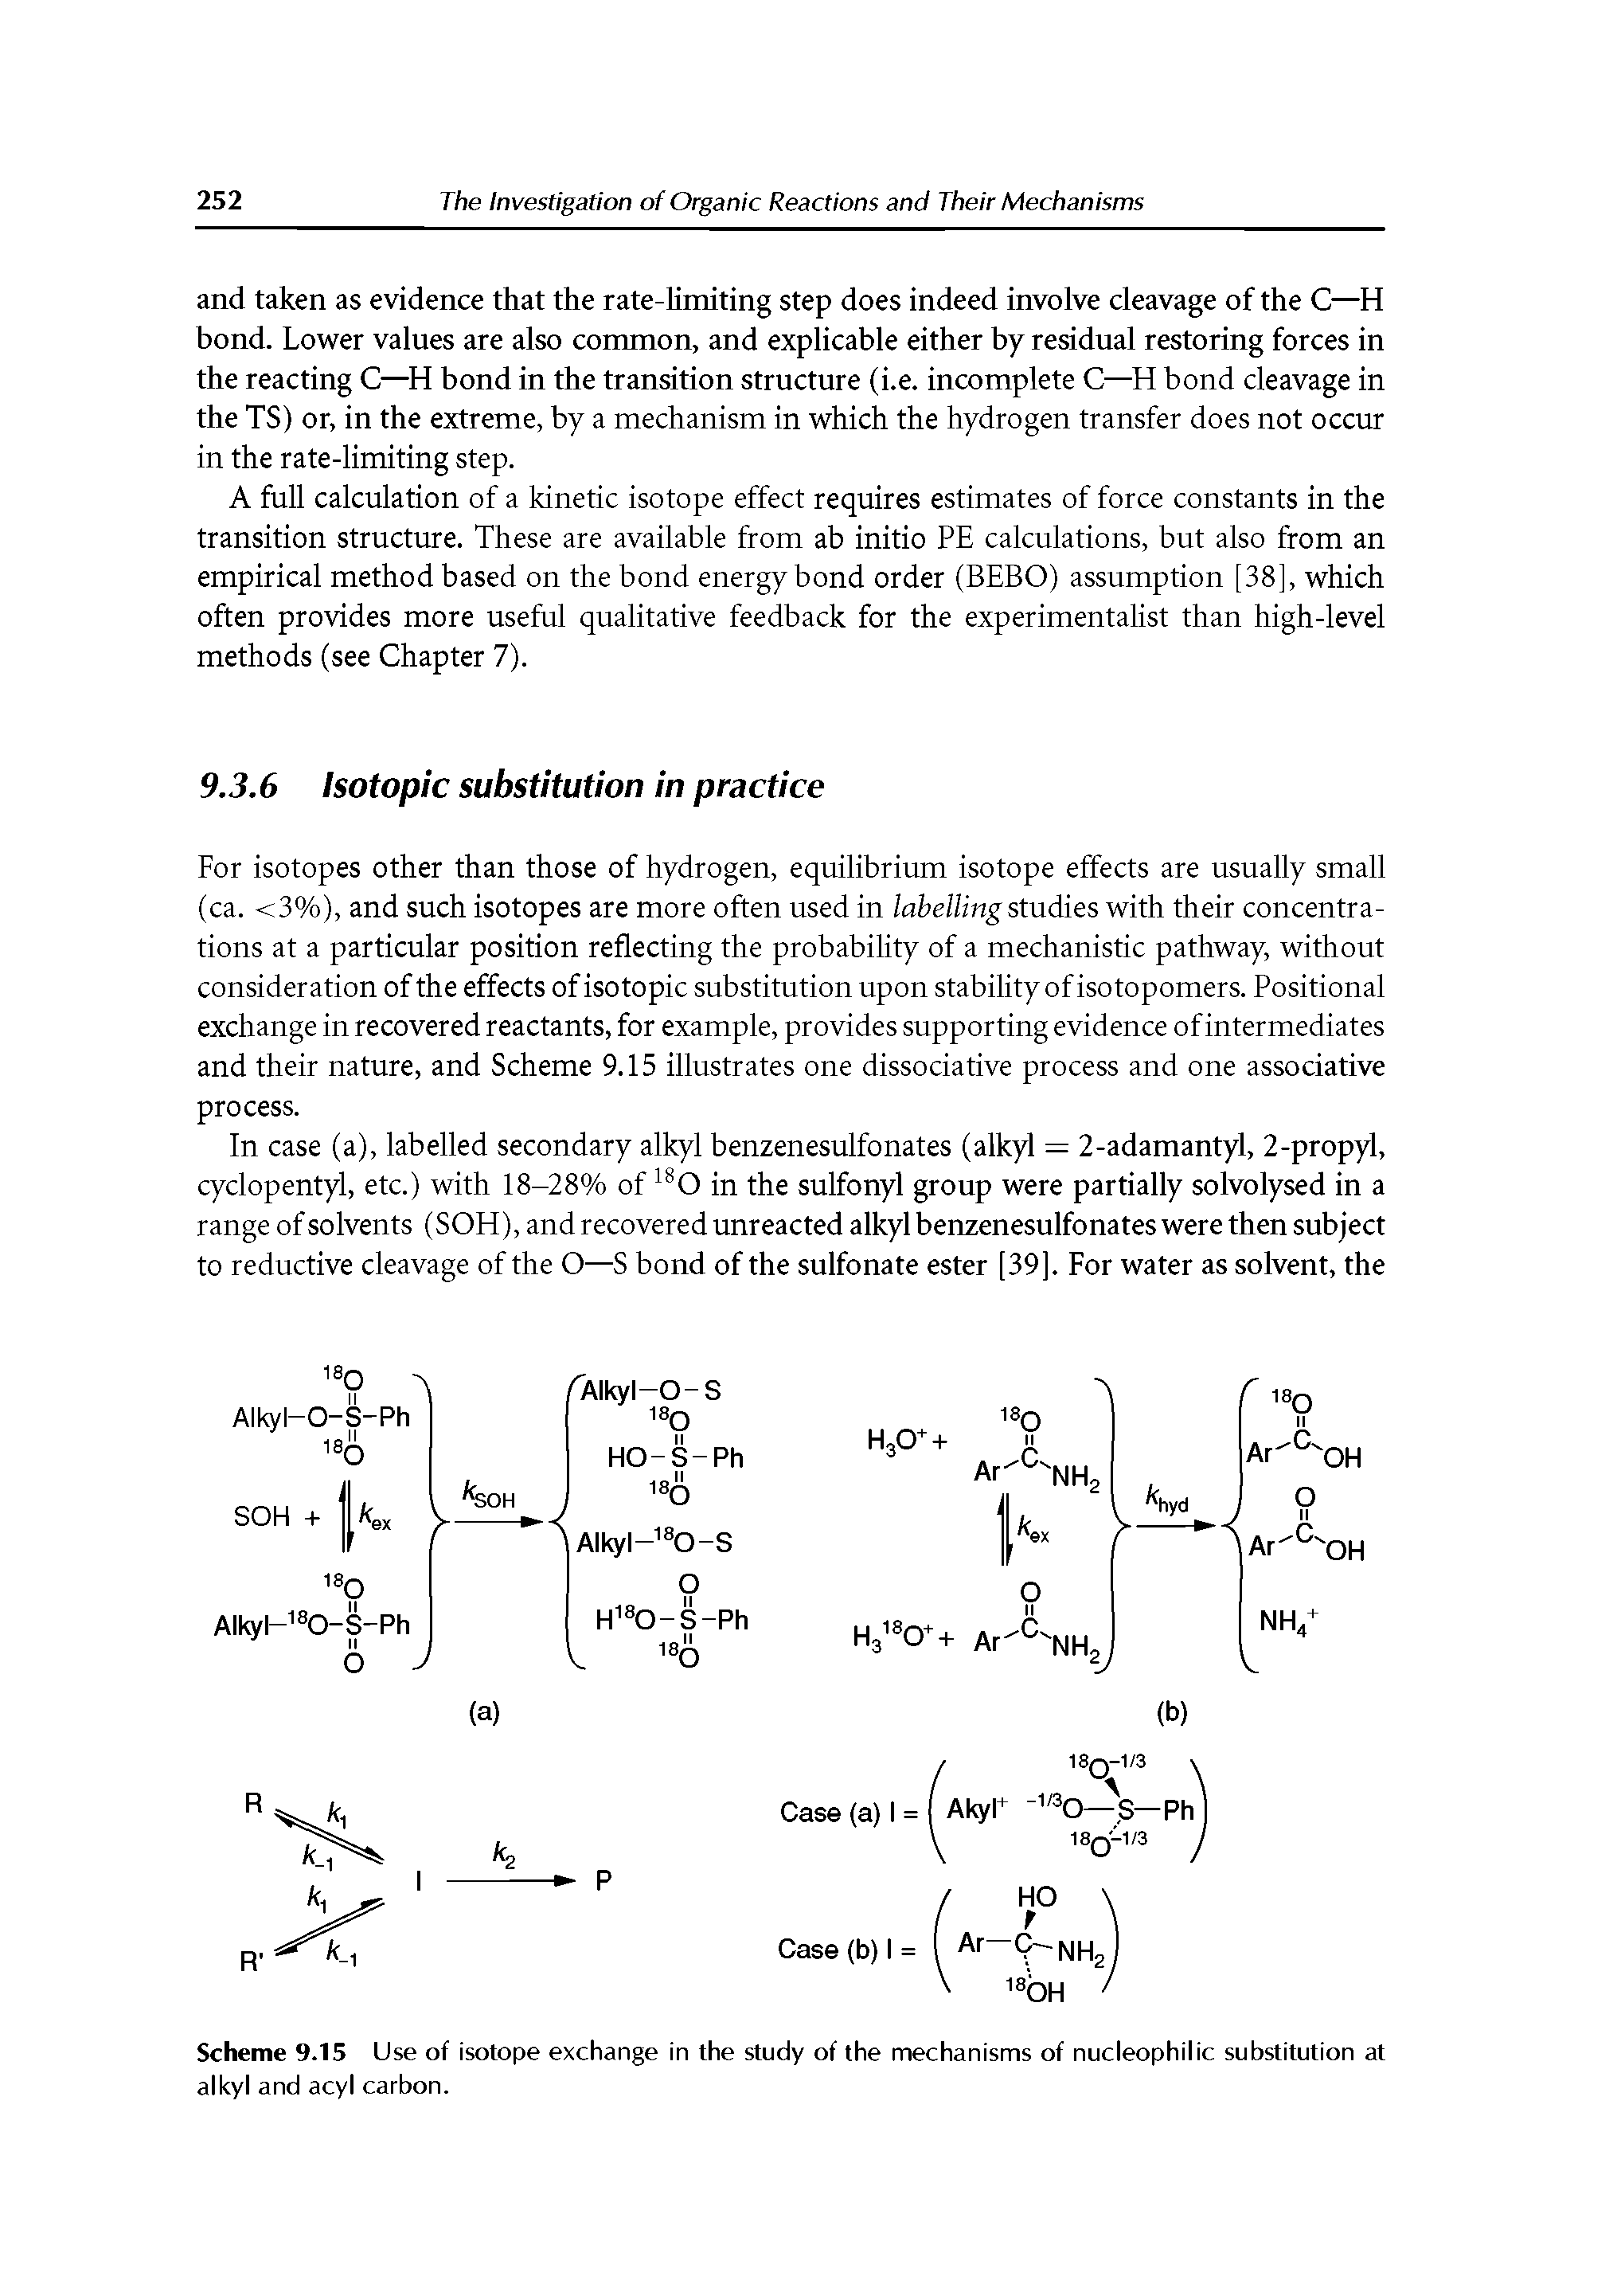 Scheme 9.15 Use of isotope exchange in the study of the mechanisms of nucleophilic substitution at alkyl and acyl carbon.